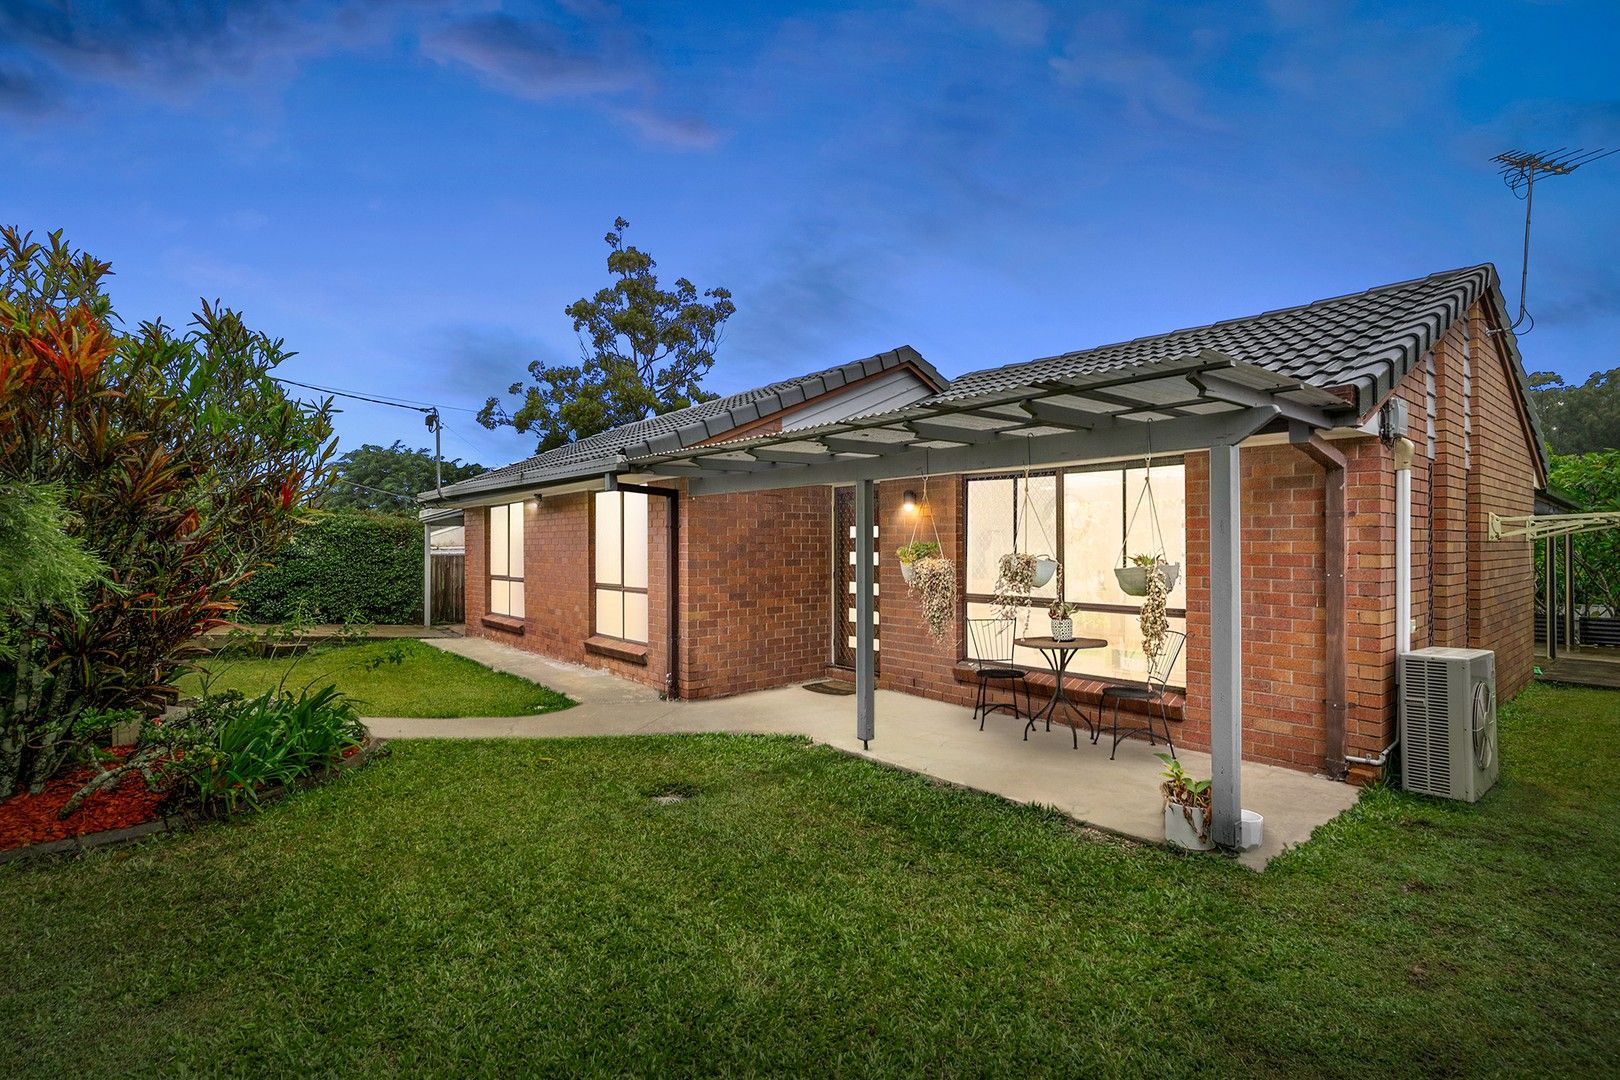 3 bedrooms House in 38 Exilis Street ROCHEDALE SOUTH QLD, 4123